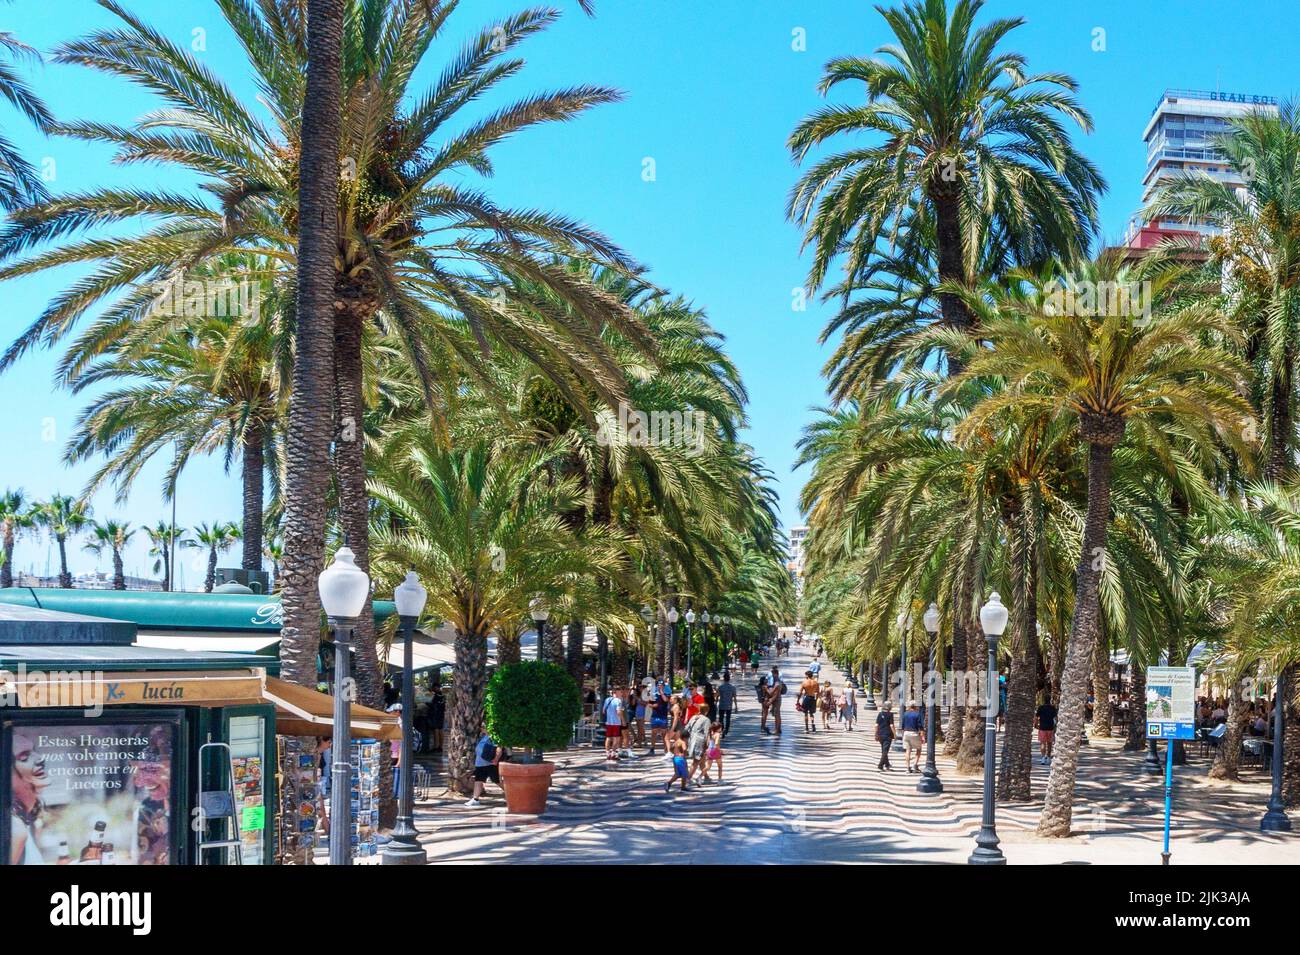 Alicante, Spain - July 10, 2022: People walking in La Esplanada which is a famous place and tourist attraction Stock Photo